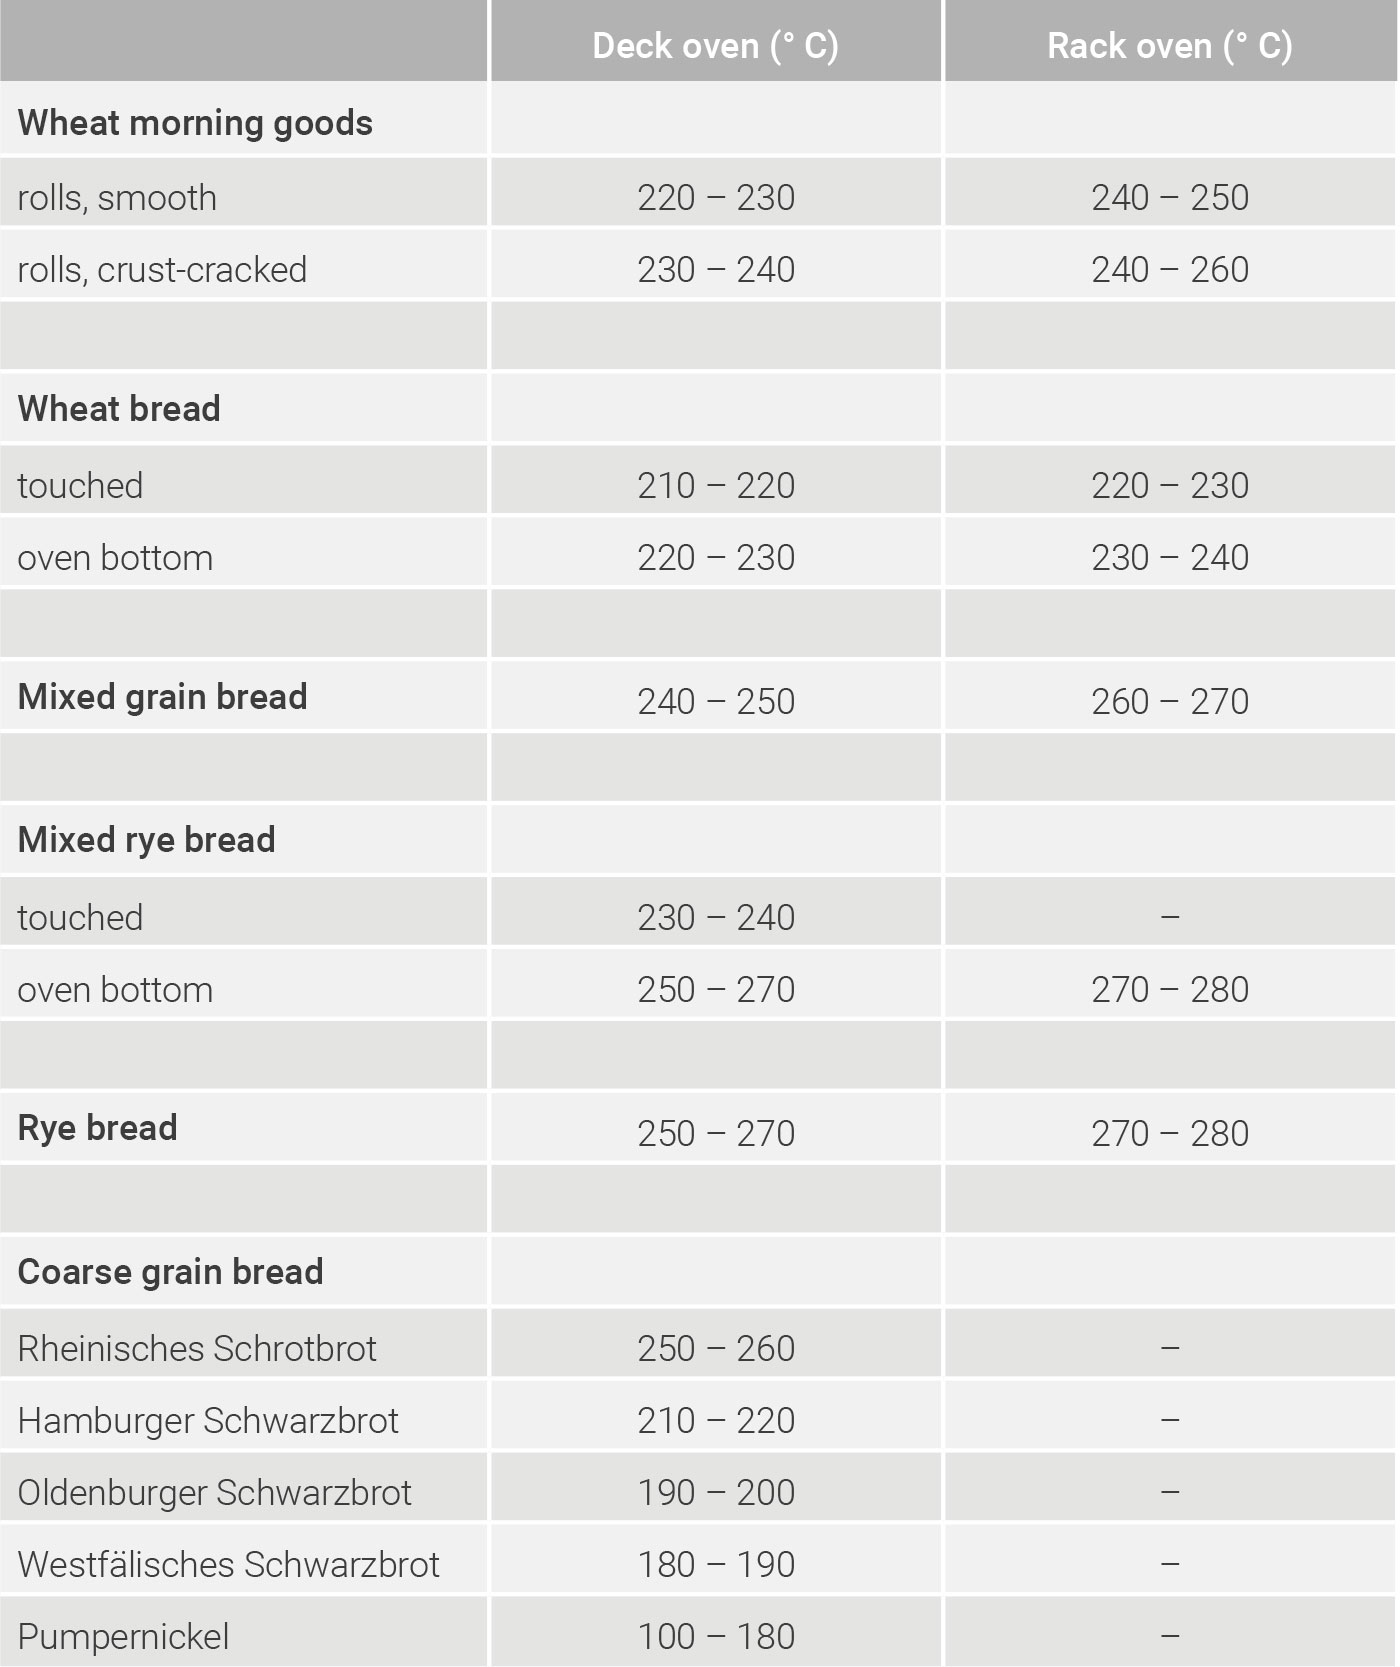 Baking temperatures for different types of baked goods 